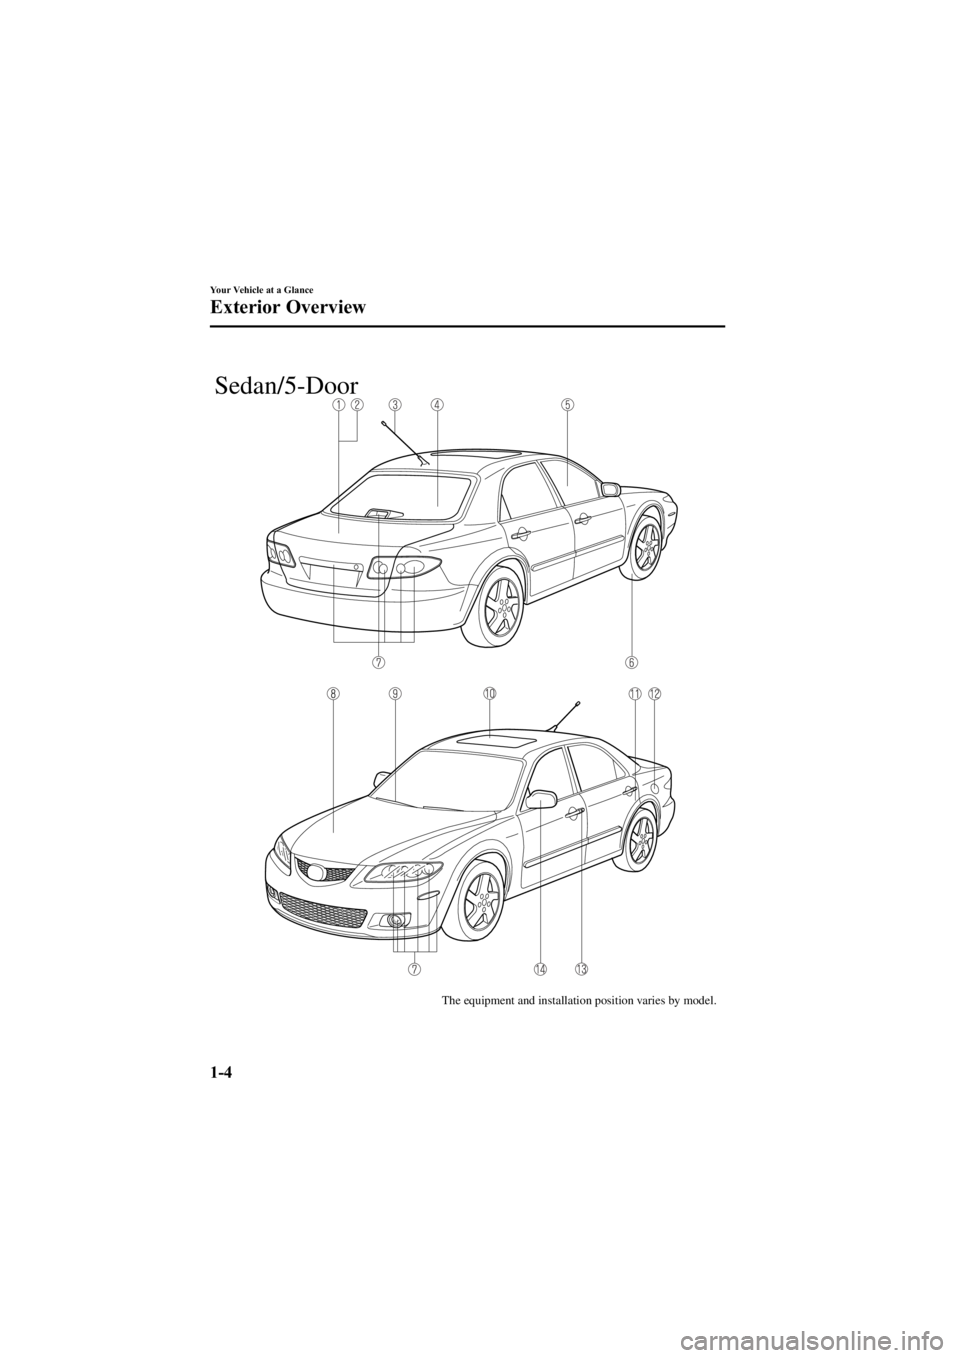 MAZDA MODEL 6 SPORT WAGON 2006  Owners Manual Black plate (10,1)
The equipment and installation position varies by model.
Sedan/5-Door
1-4
Your Vehicle at a Glance
Exterior Overview
Mazda6_8V40-EA-05L_Edition1 Page10
Monday, November 28 2005 6:9 